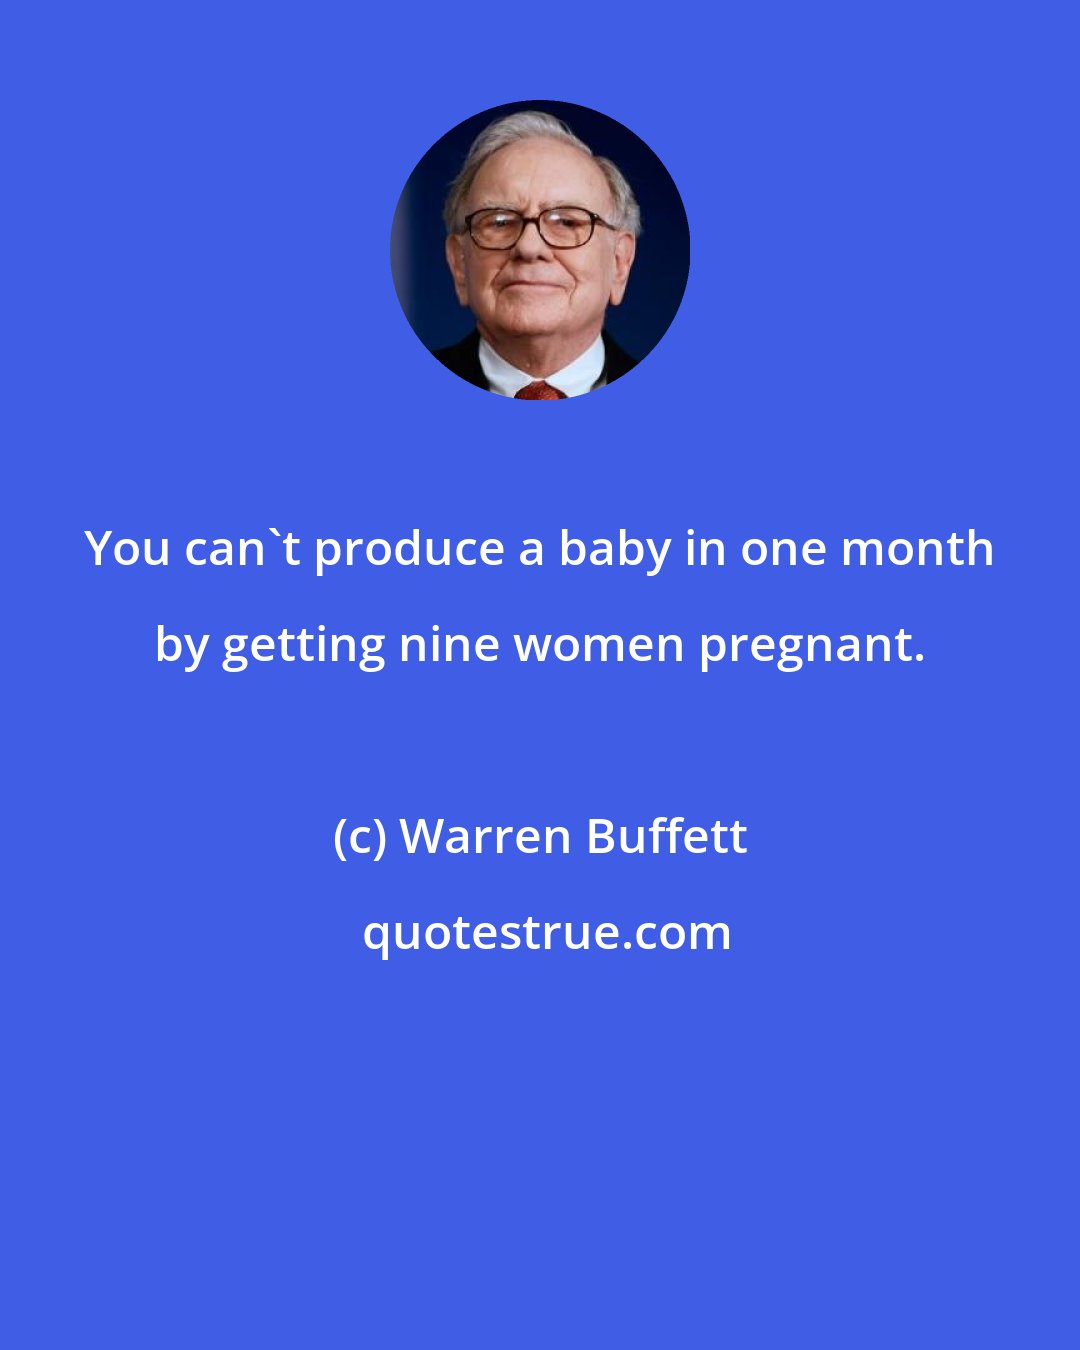 Warren Buffett: You can't produce a baby in one month by getting nine women pregnant.